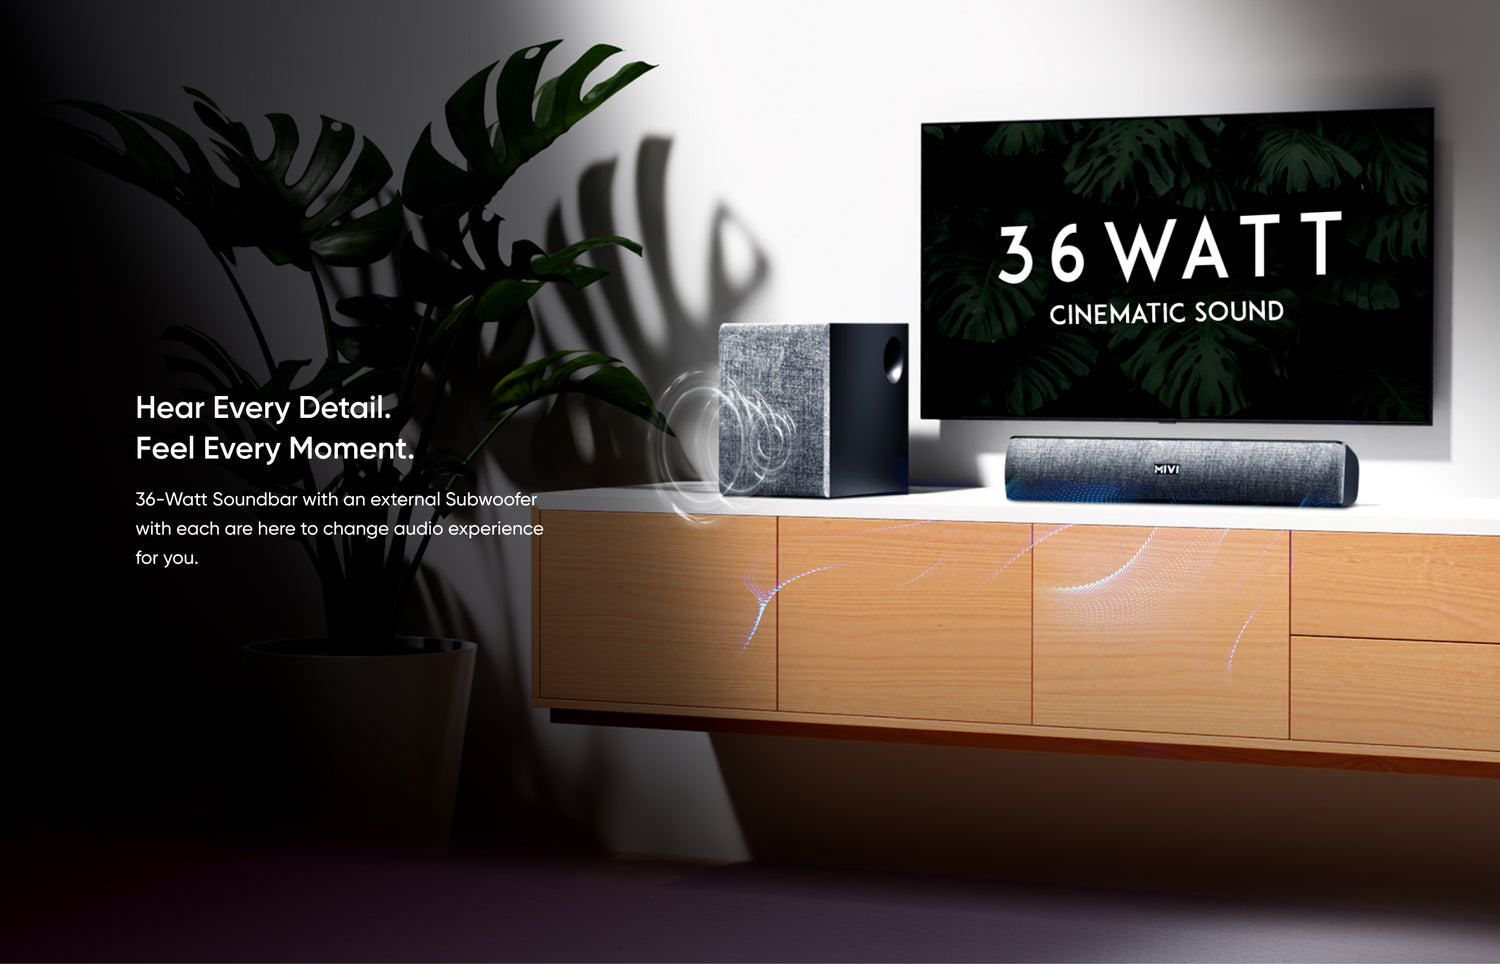 Hear Every Detail. Feel Every Moment.

36-Watt Soundbar with an external Subwoofer with each are here to change audio experience for you.